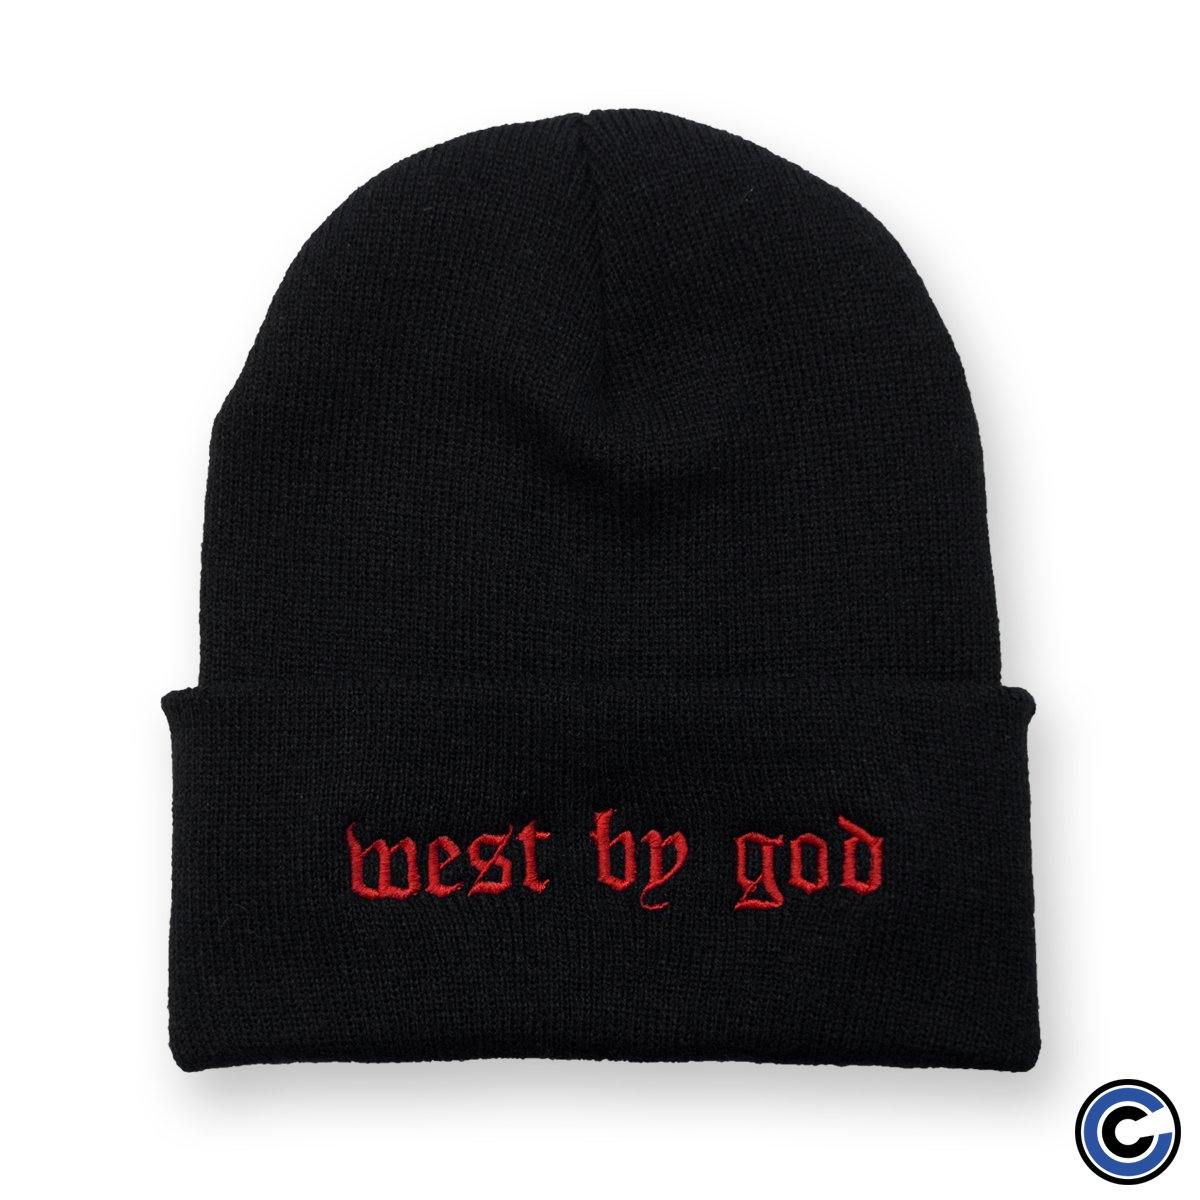 Buy – Left Behind "West By God" Beanie – Band & Music Merch – Cold Cuts Merch